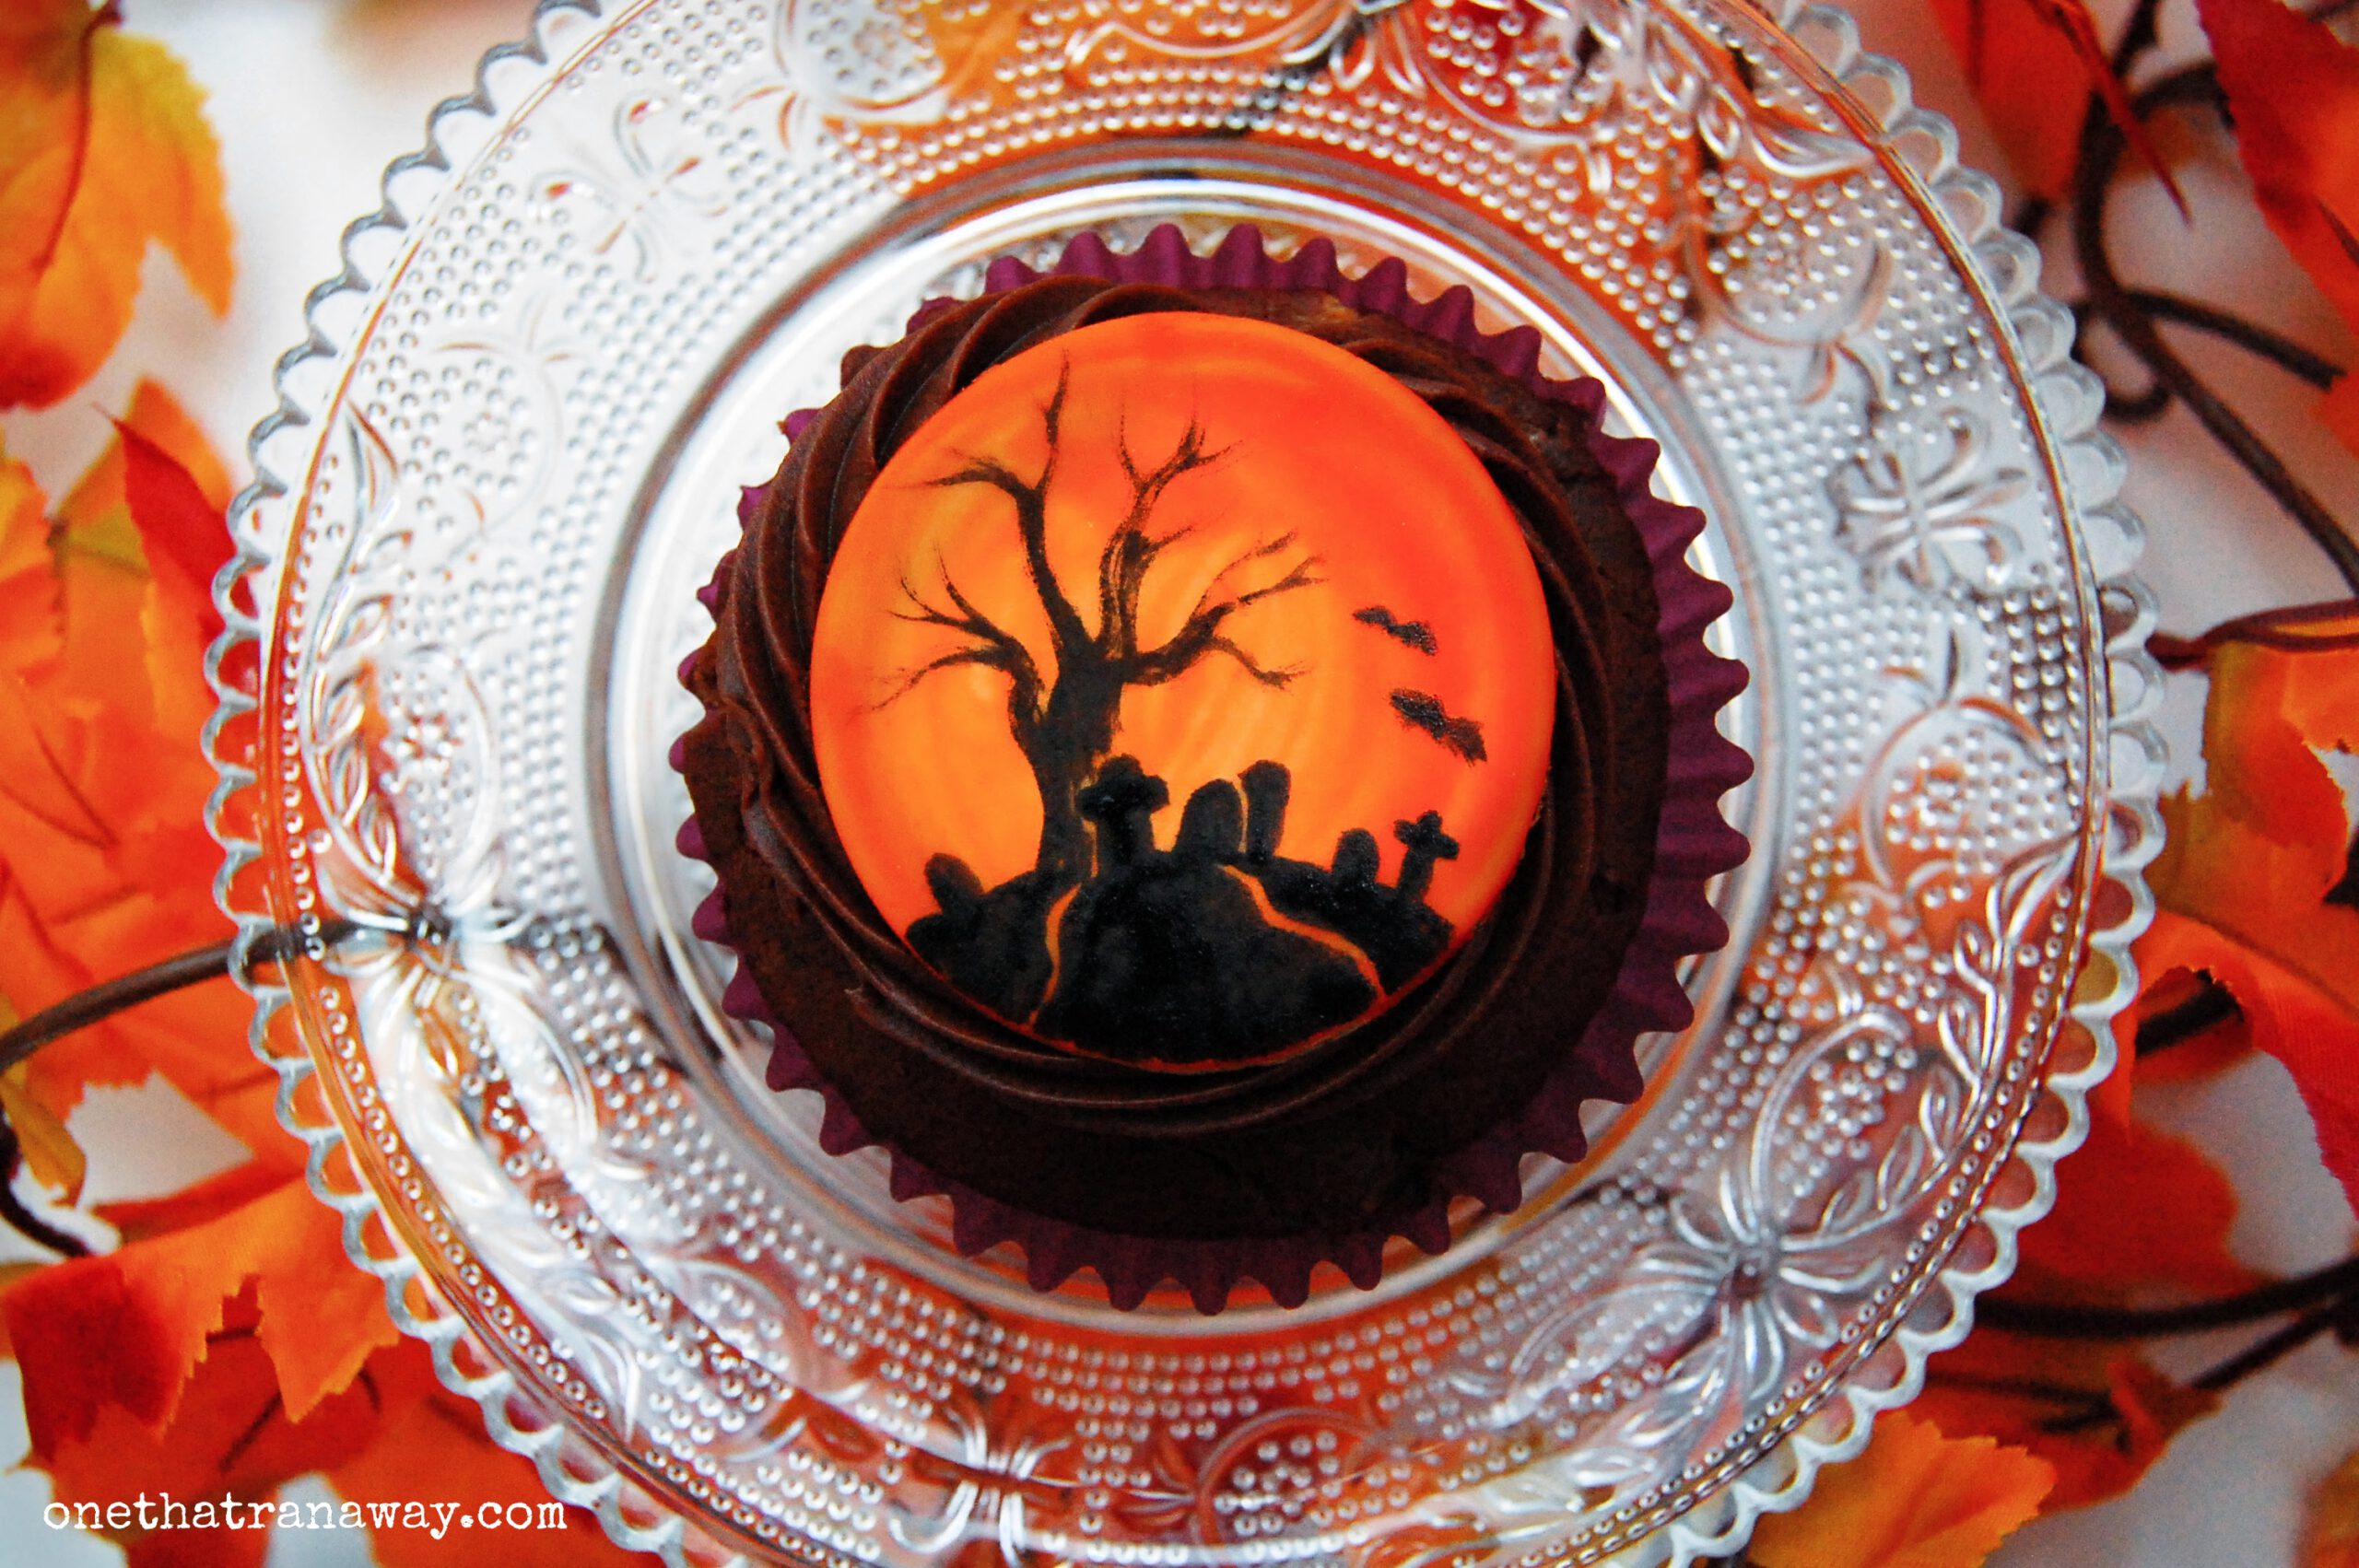 chocolate cupcake with an orange fondant topper showing the silhouette of a tree and graveyard